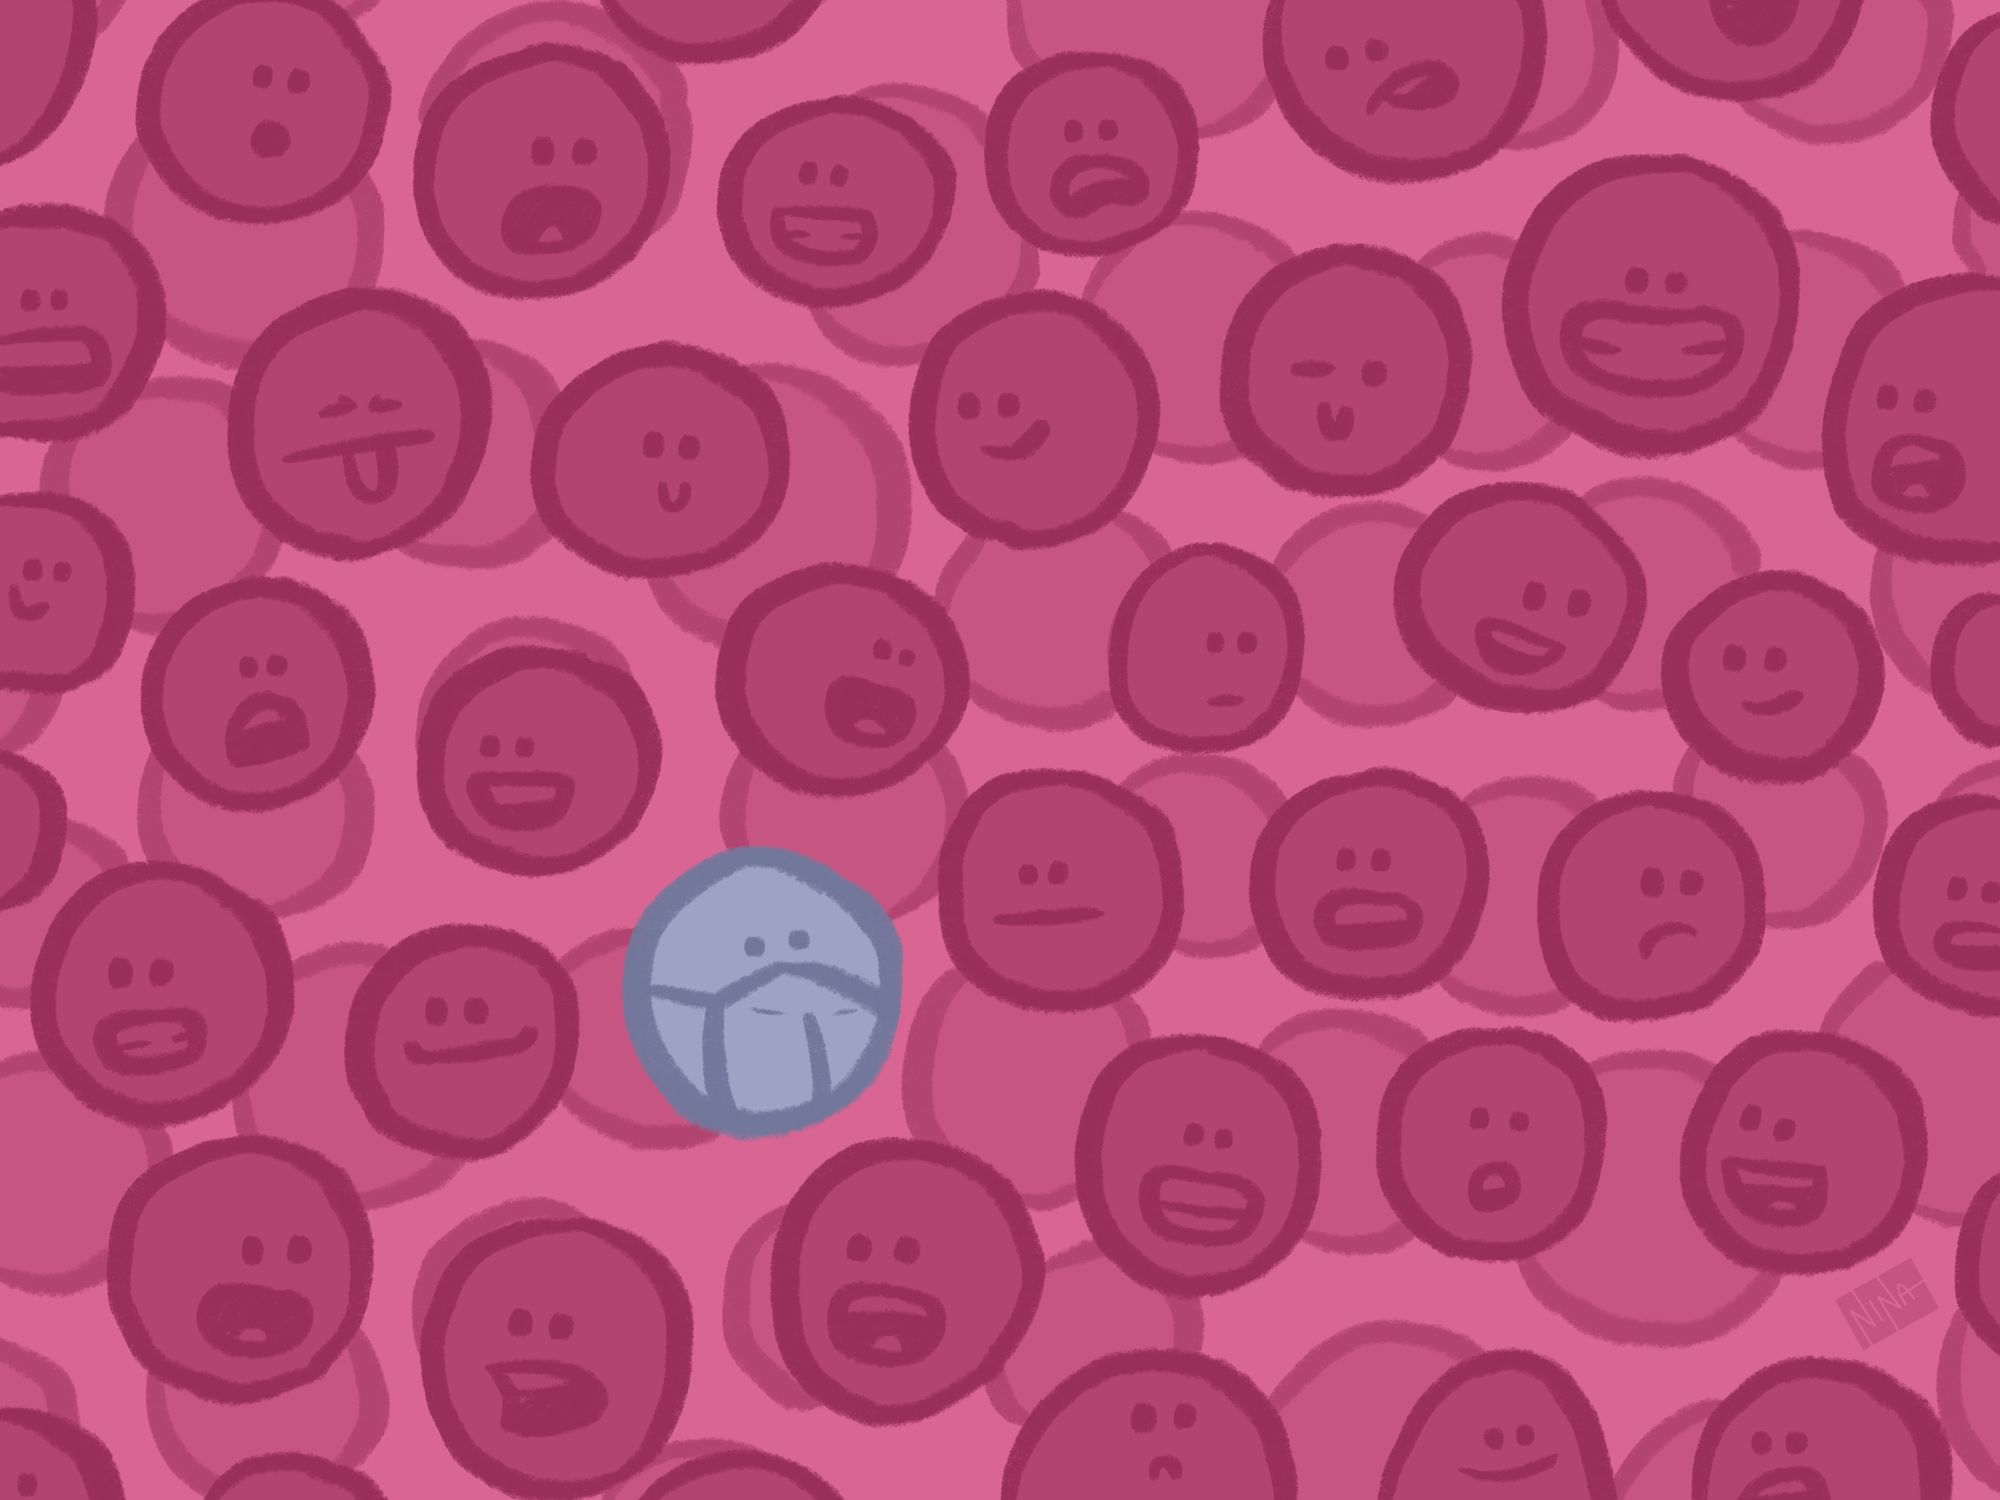 A graphic of a sea of pink unmasked faces with one blue masked face.